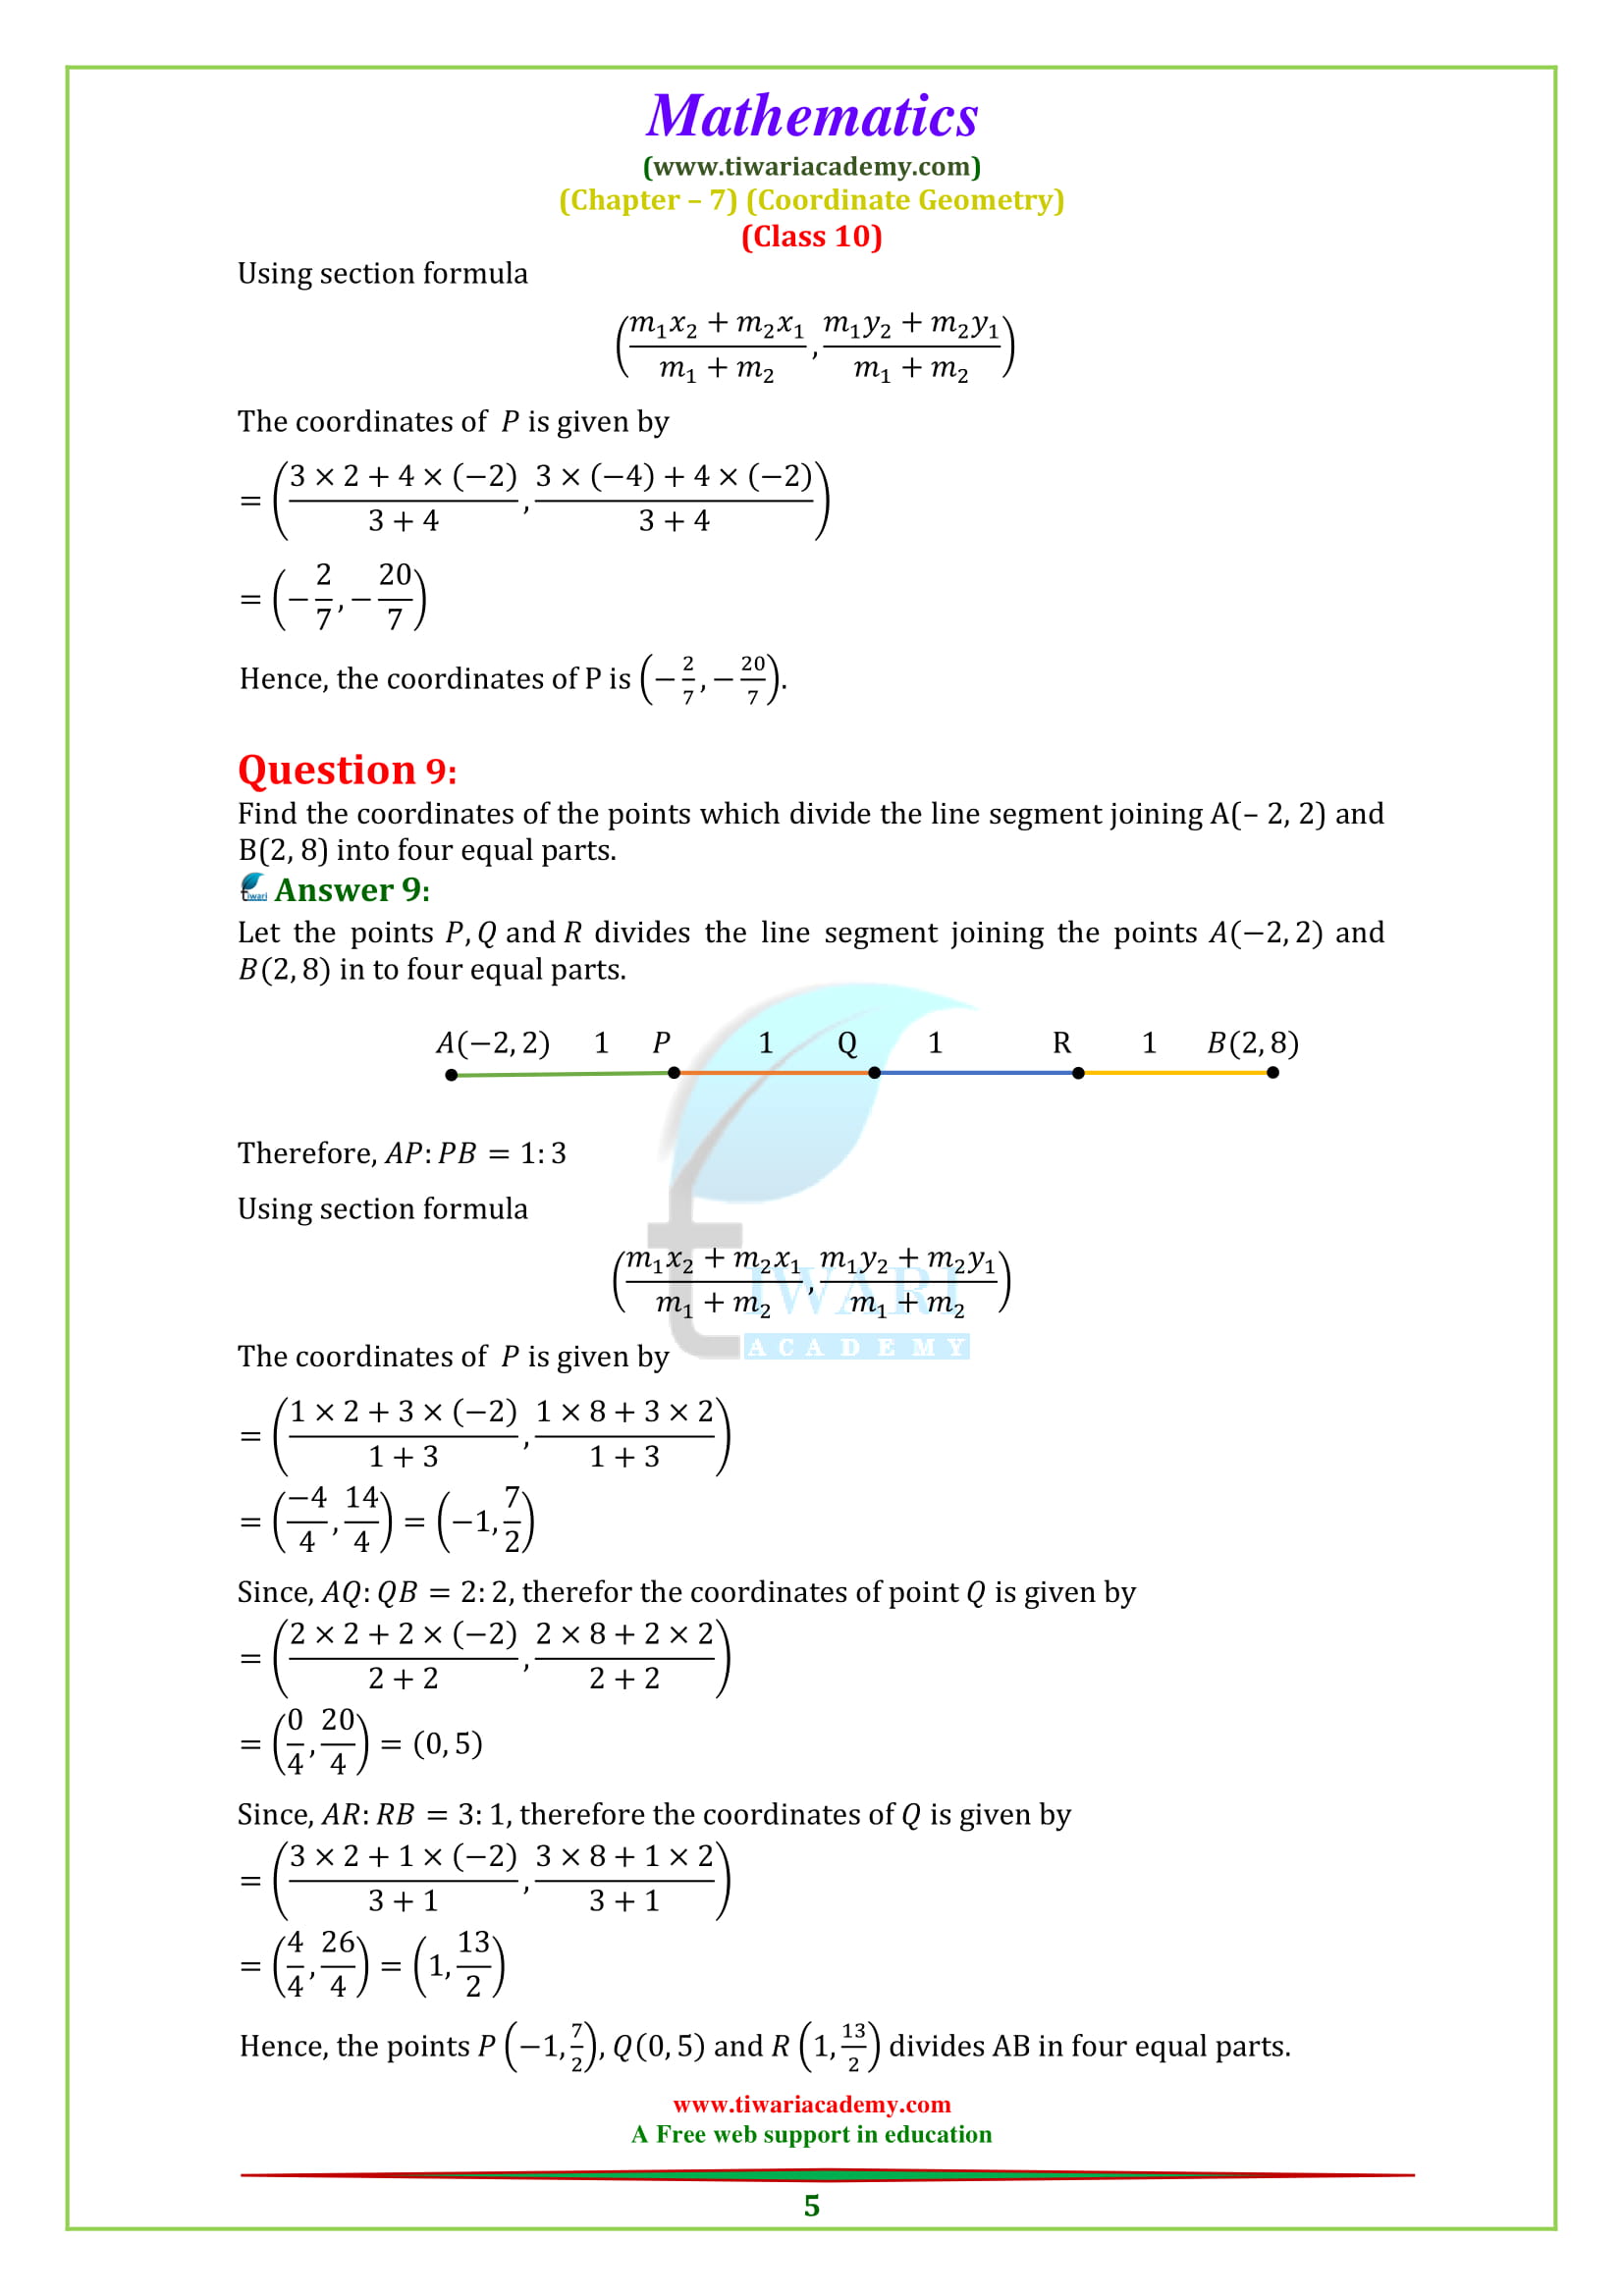 10 Maths exercise 7.2 Solutions for 2018-19